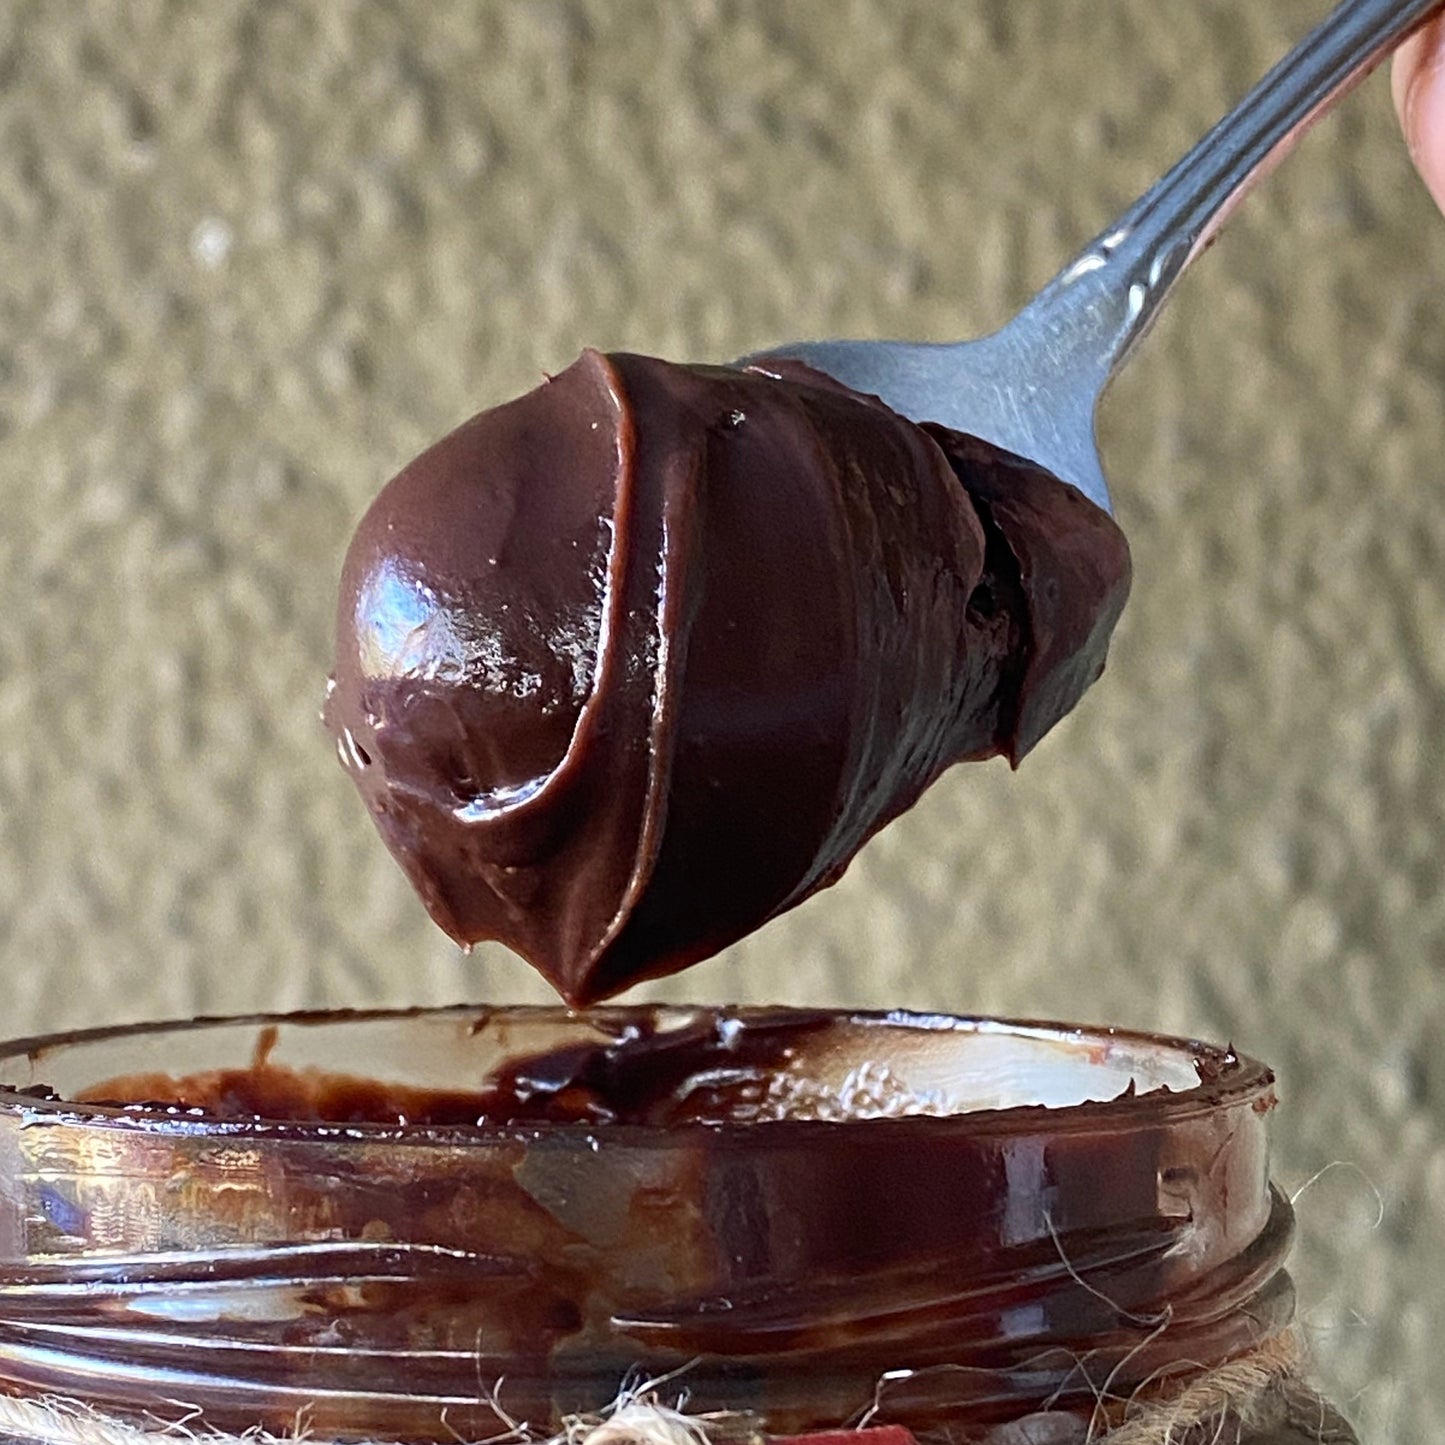 Chocolate Icing in a Jar